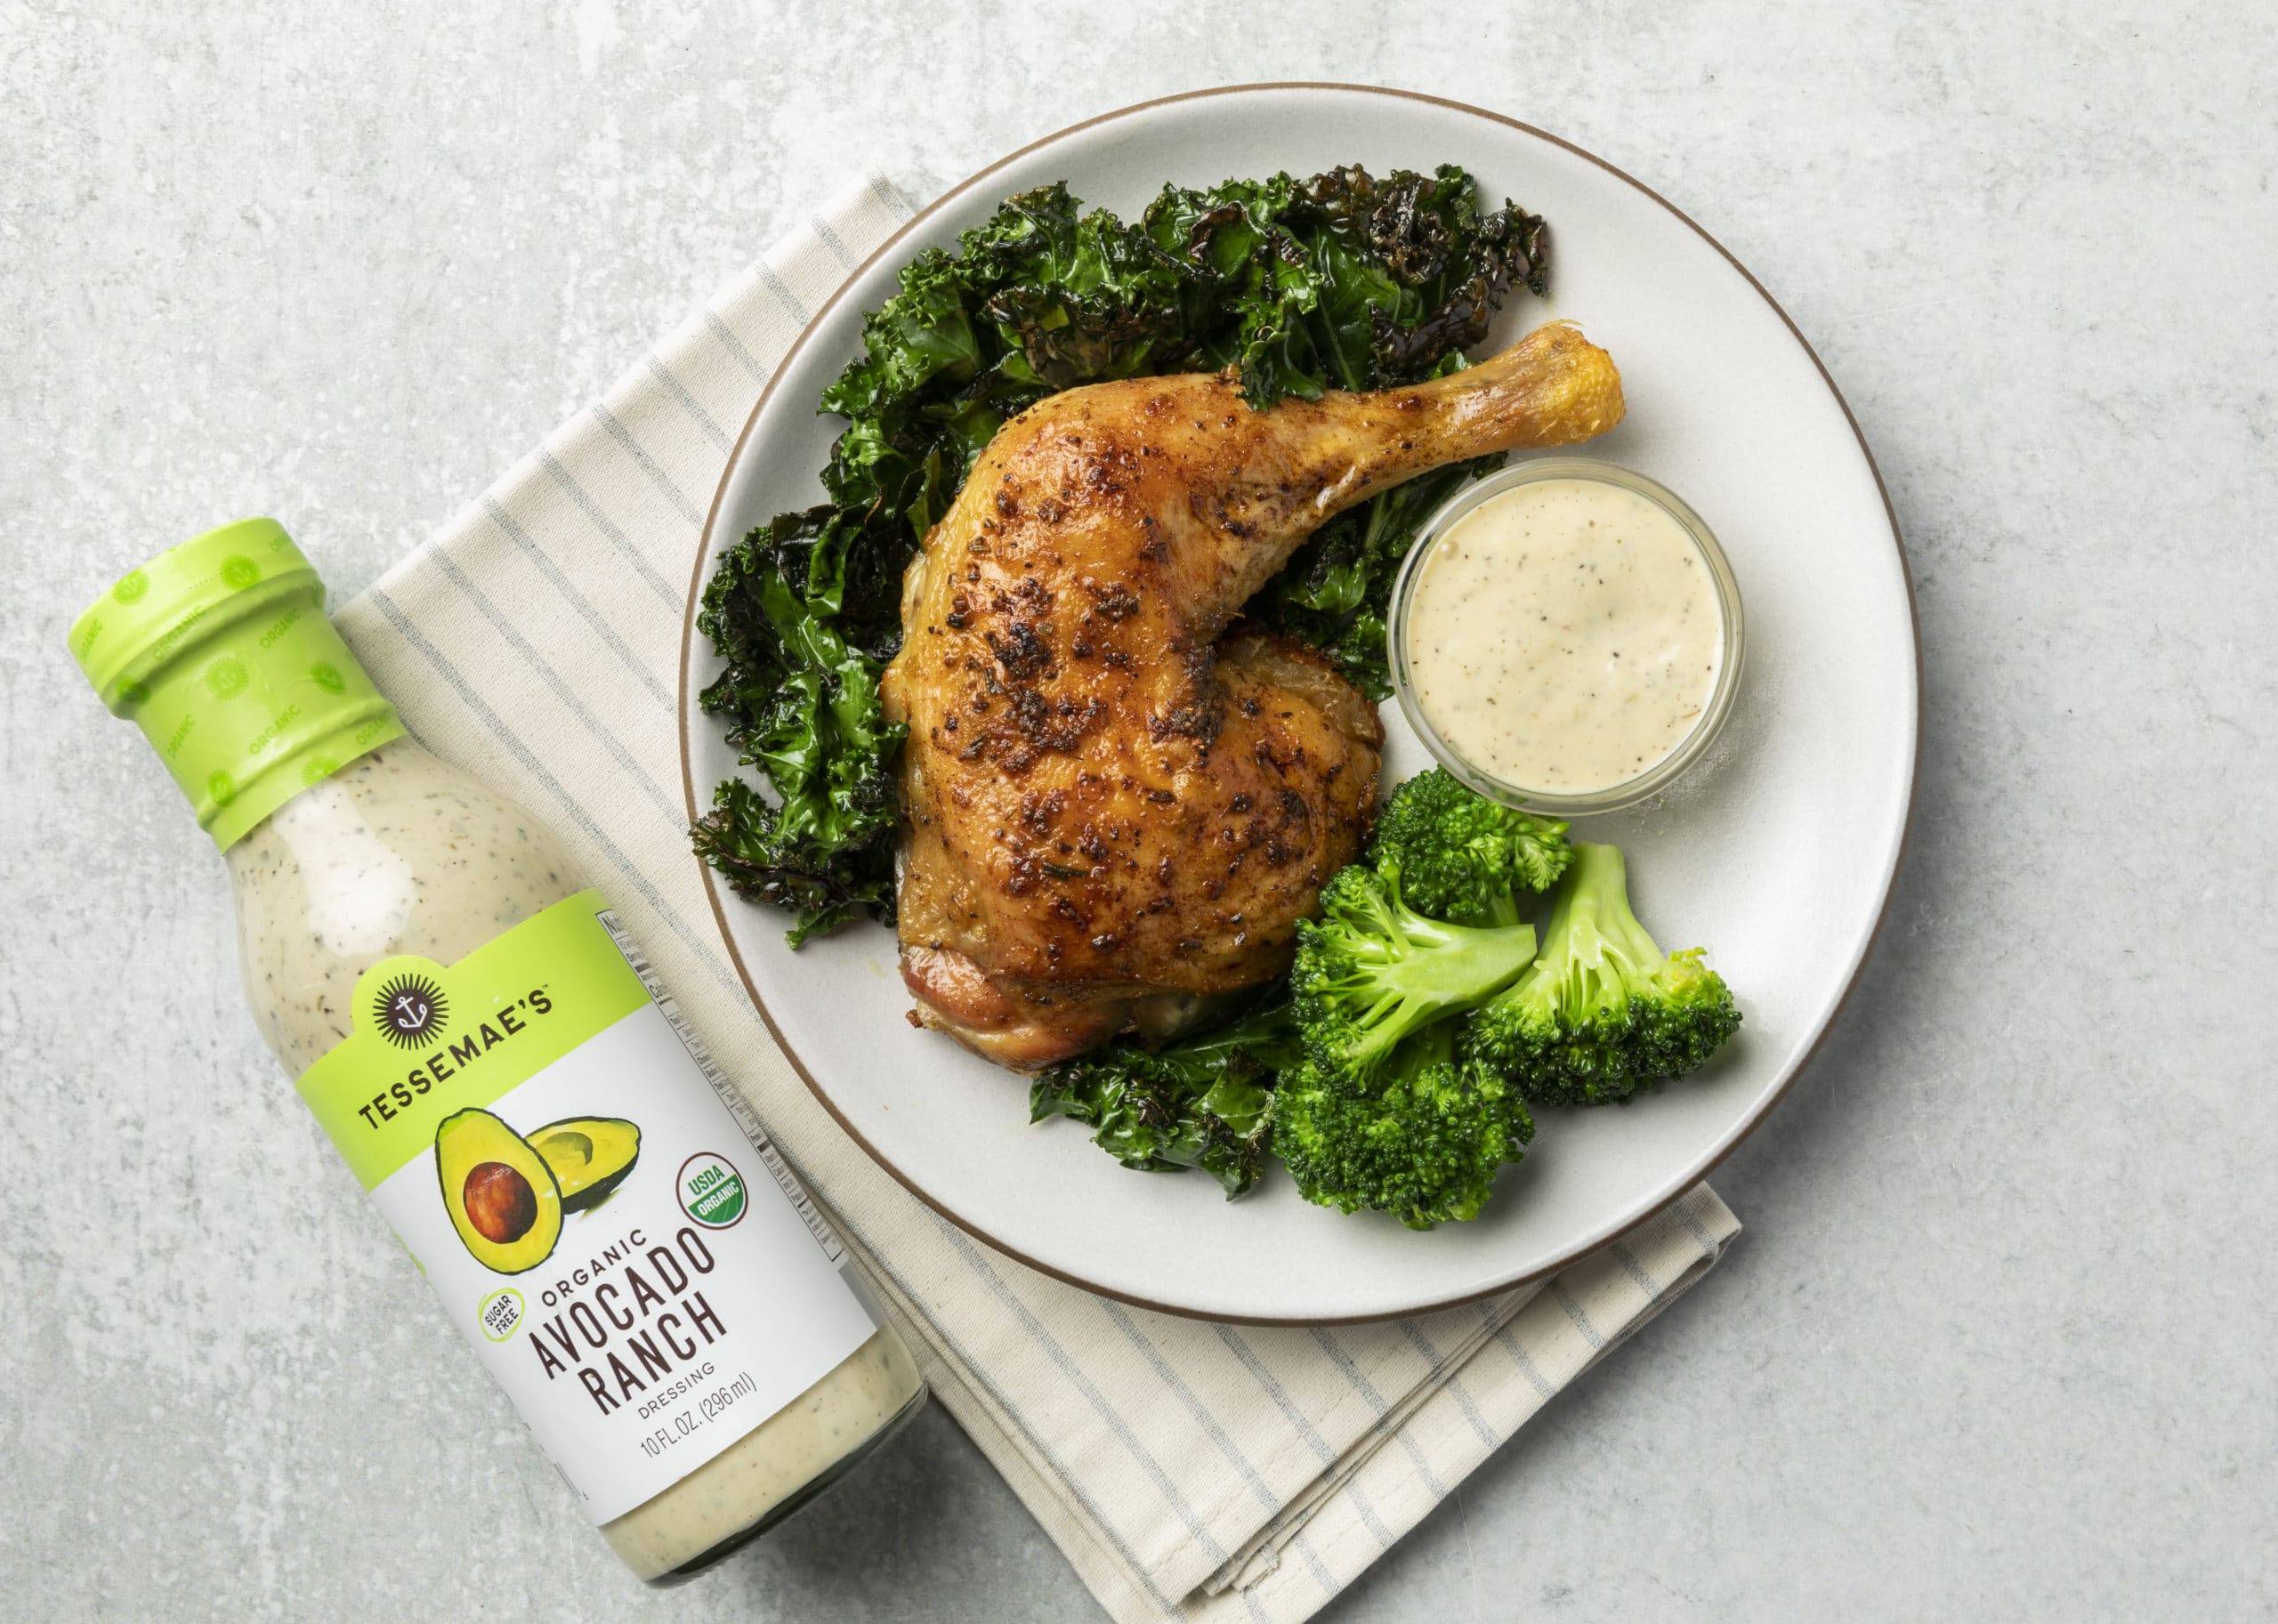 Rotisserie chicken thigh on a bed of greens with Tessamae's Avocado Ranch dressing on the side